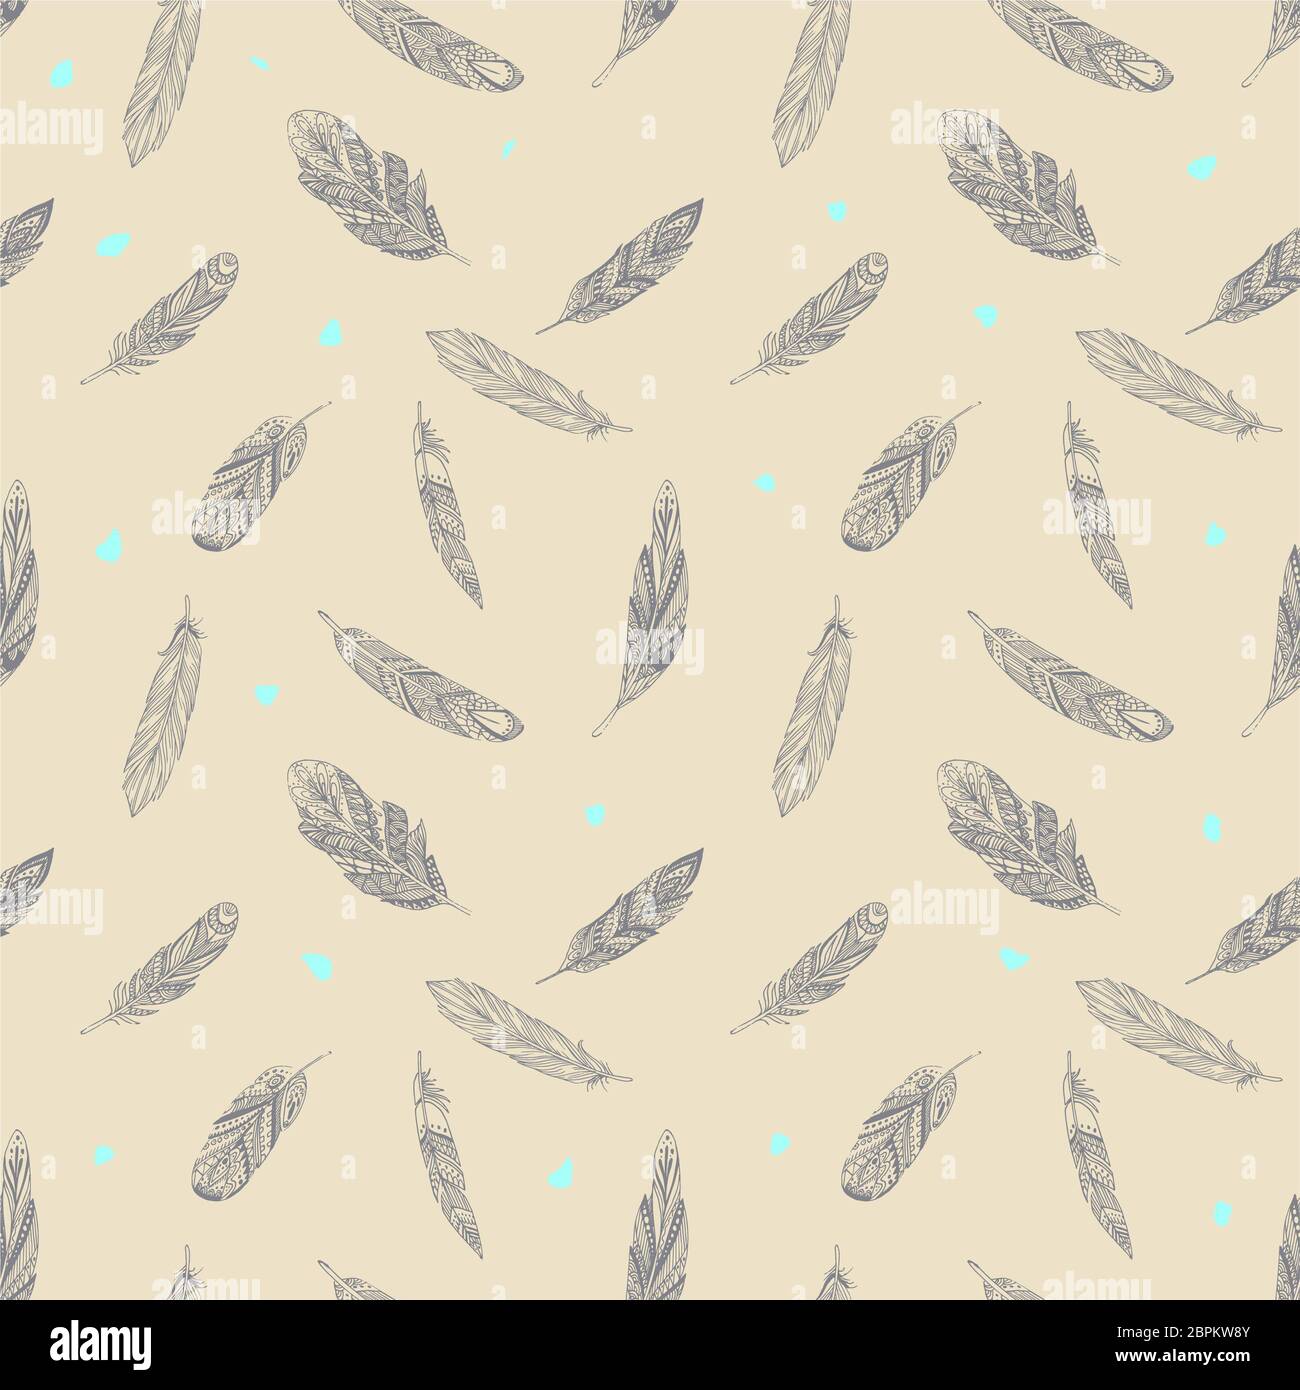 Seamless pattern with ethnic feathers. Tribal Feathers Vintage Pattern. Hand Drawn Doodles. Stock Photo